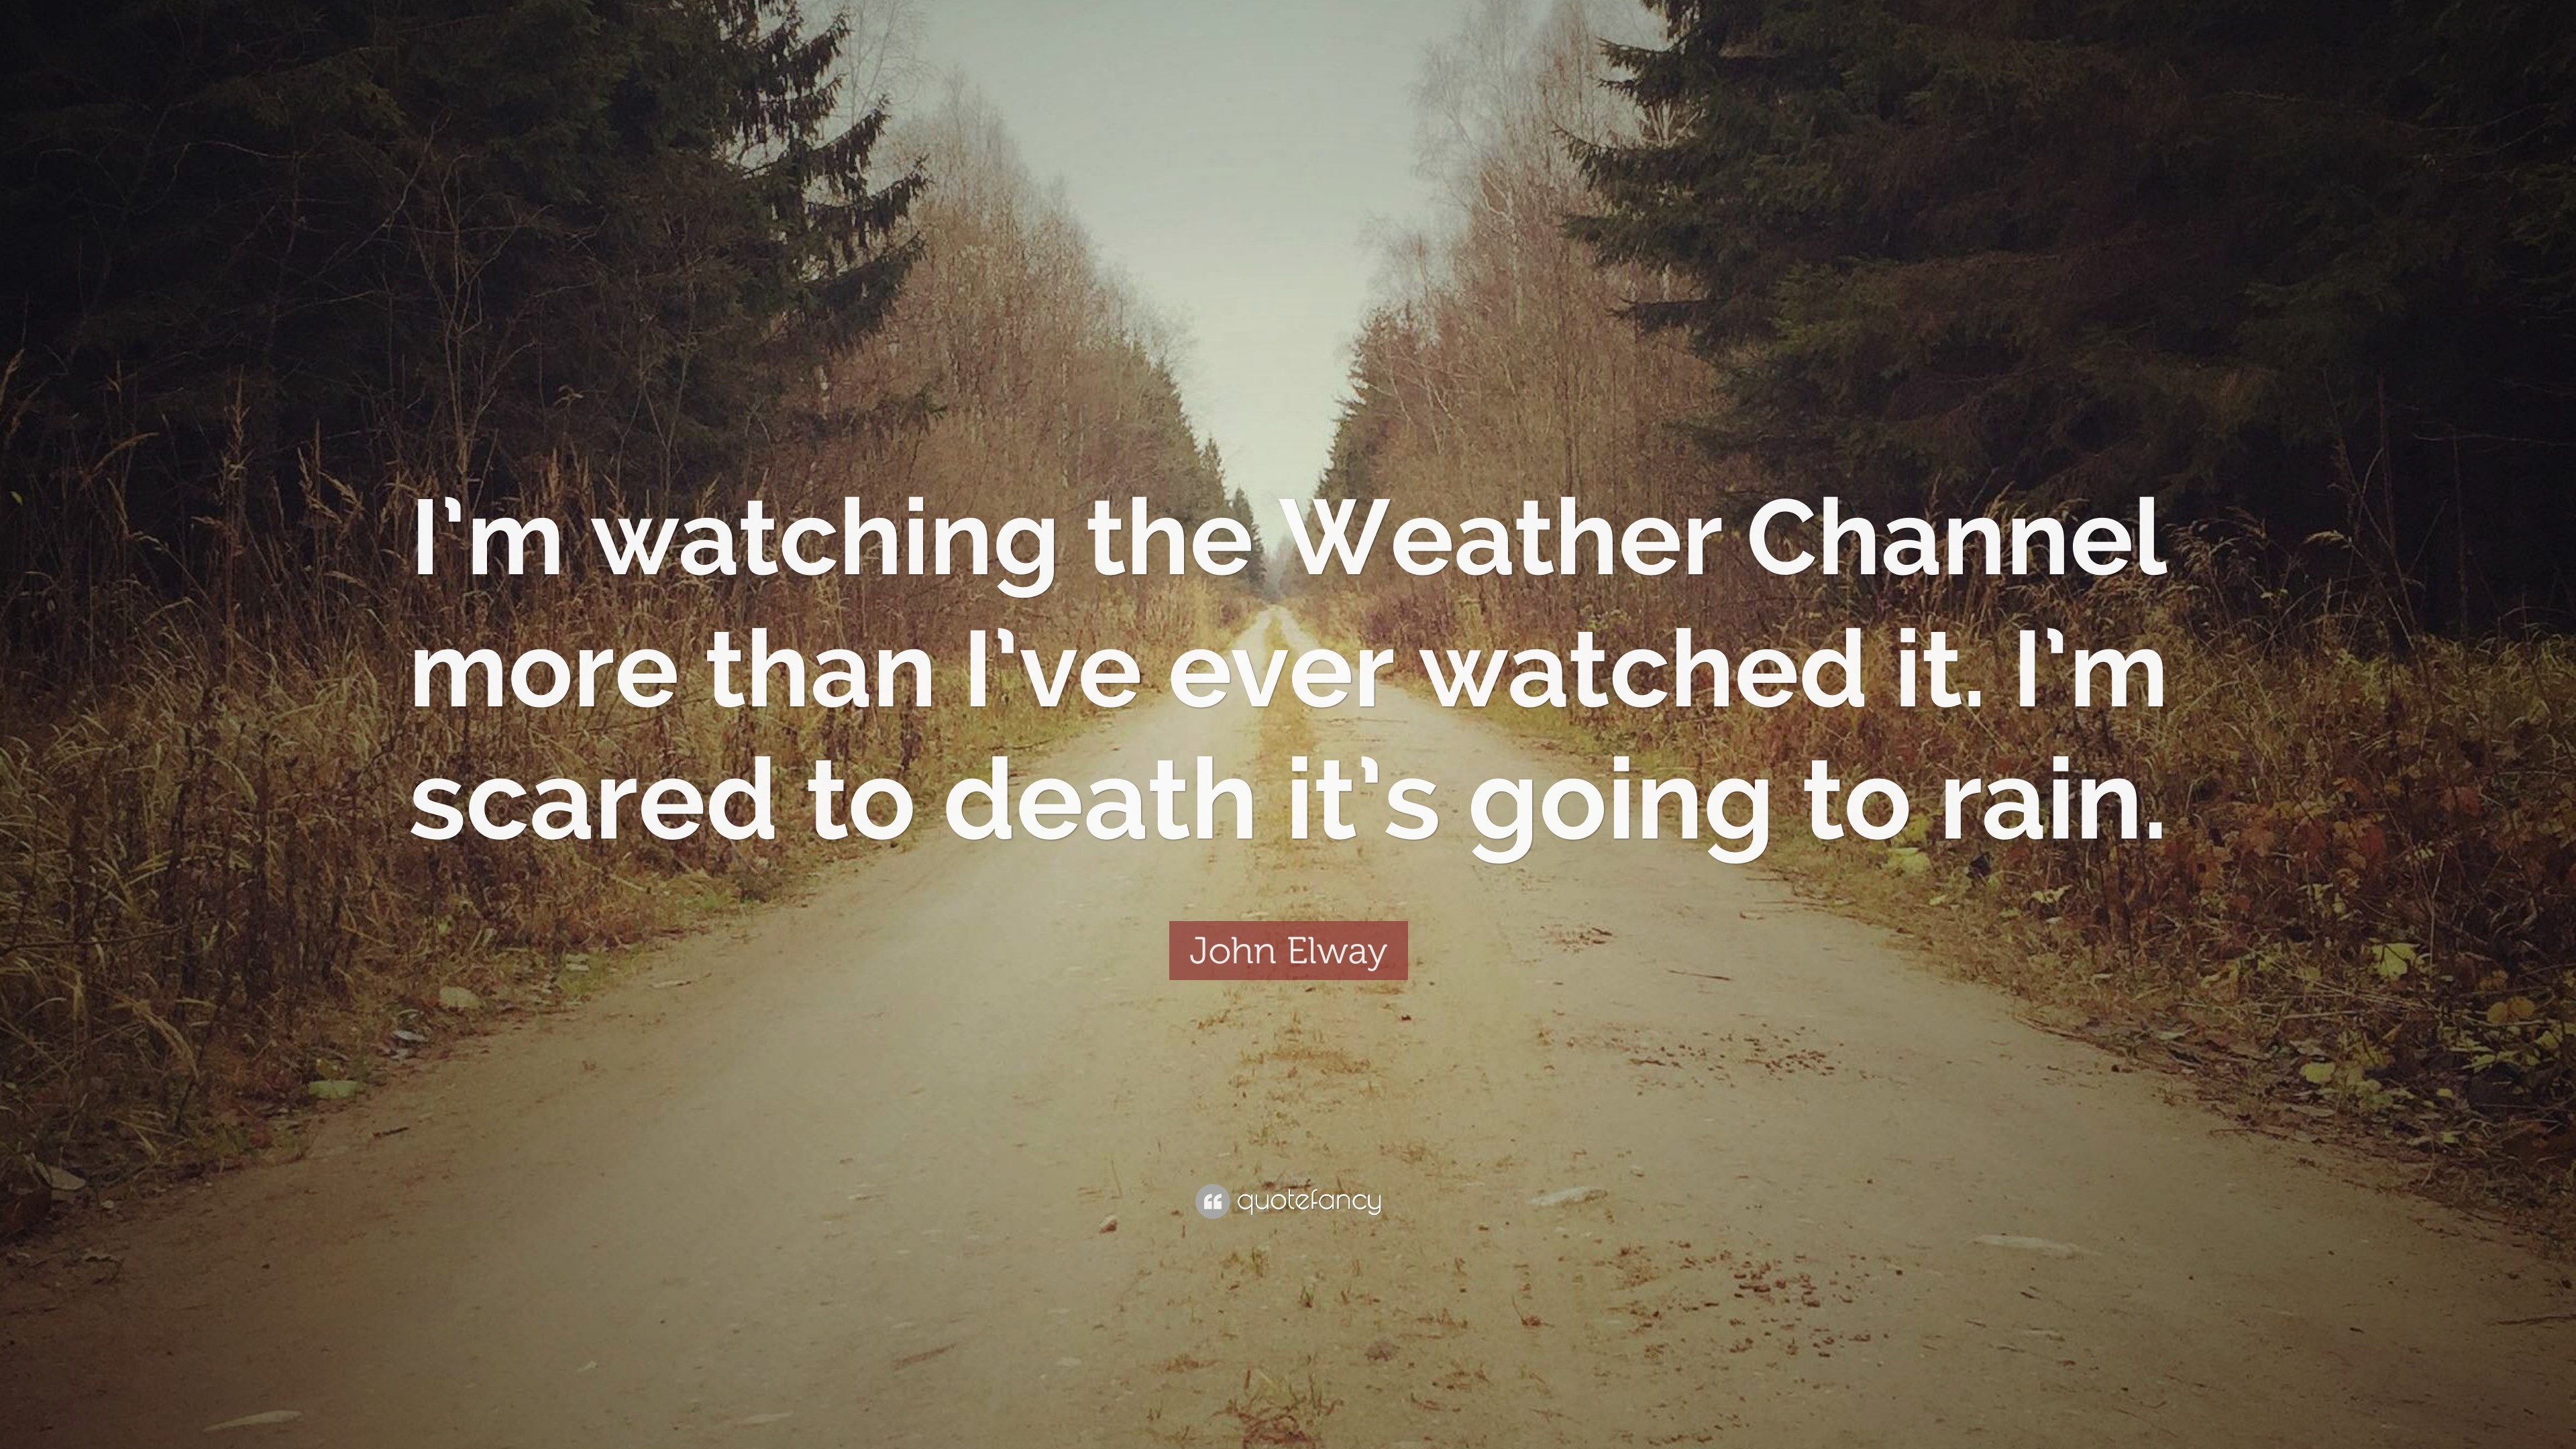 3840x2160 John Elway Quote: “I'm watching the Weather Channel more than I'